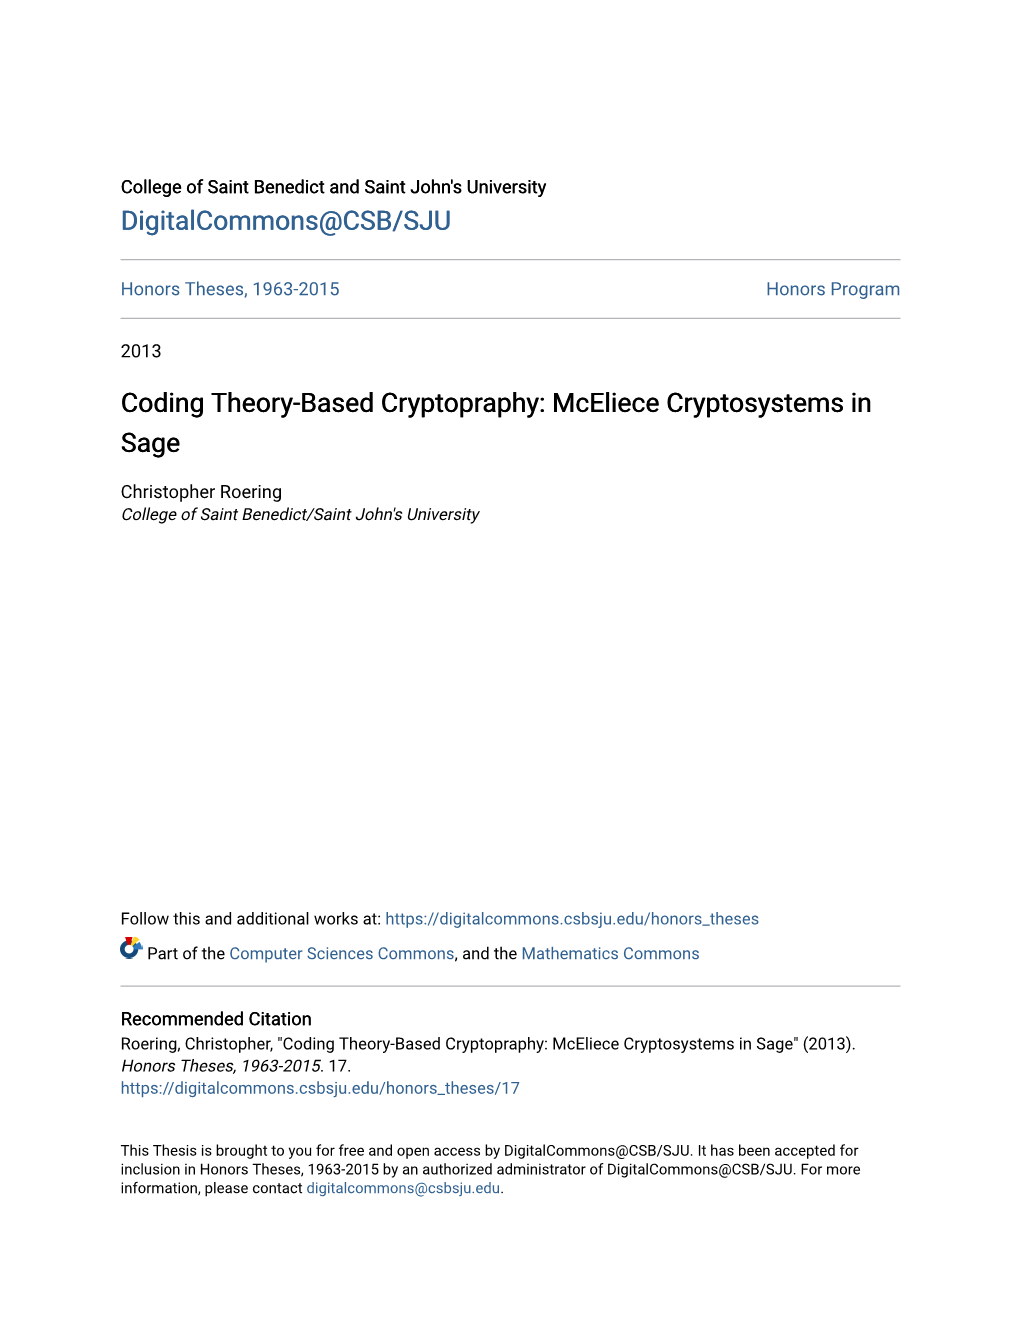 Coding Theory-Based Cryptopraphy: Mceliece Cryptosystems in Sage